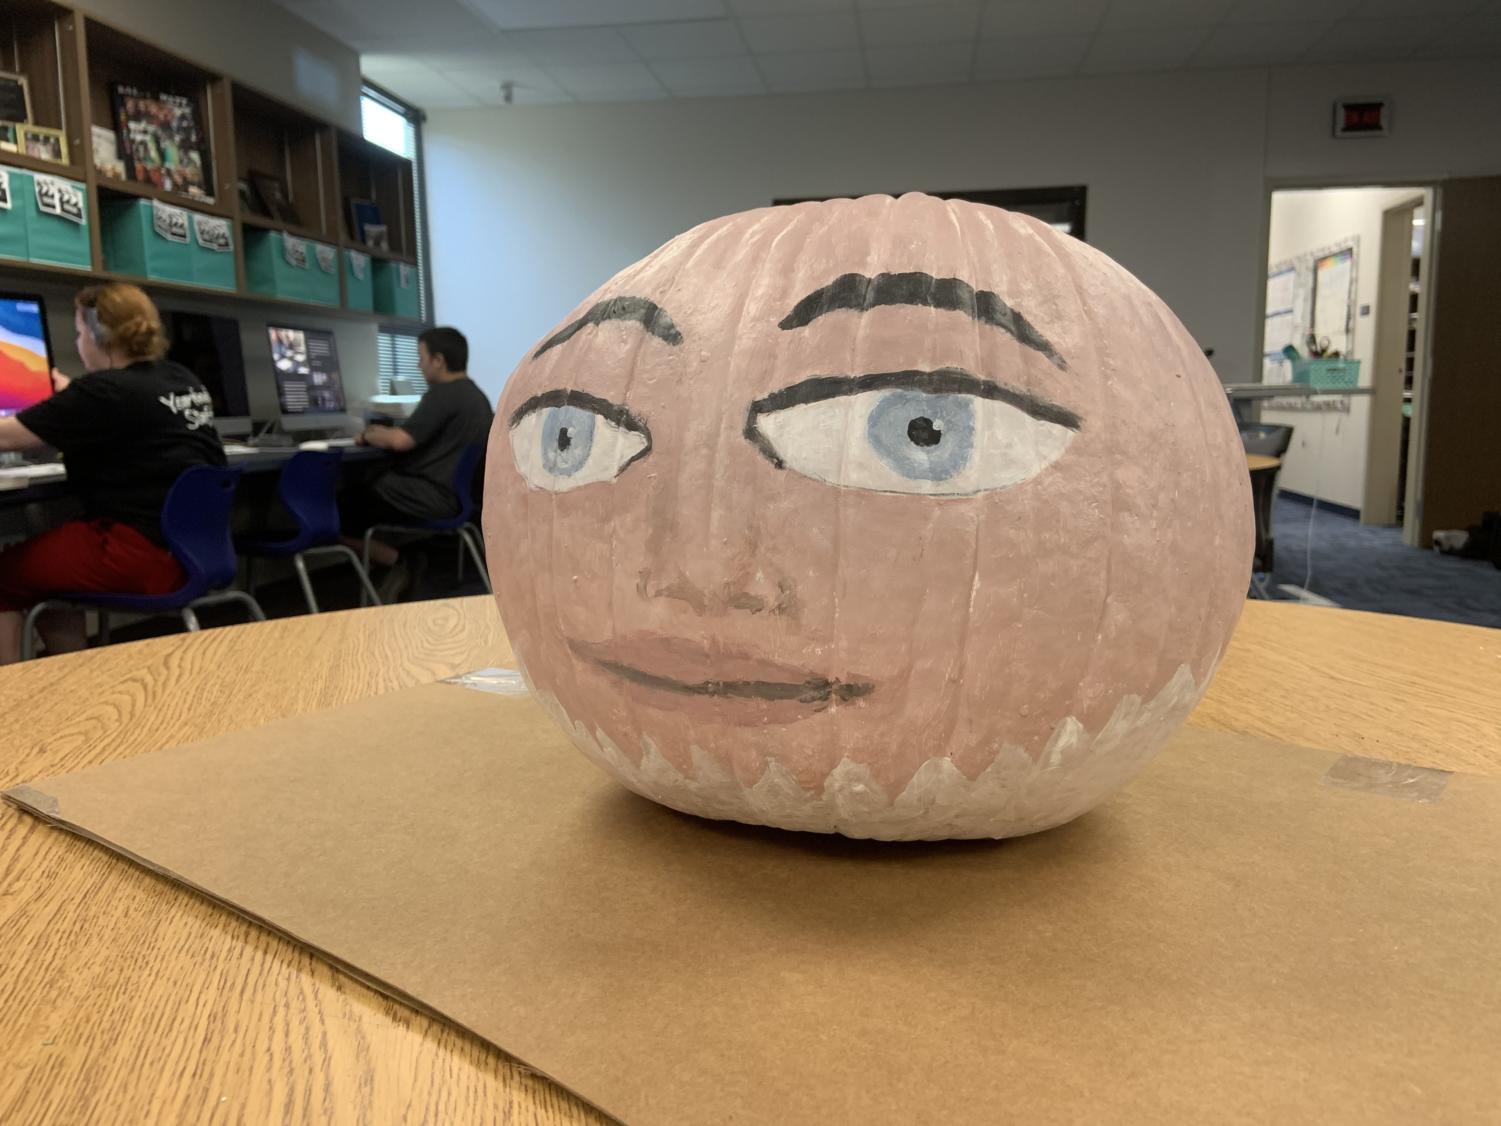 Yearbook students create their pumpkin for the contest.